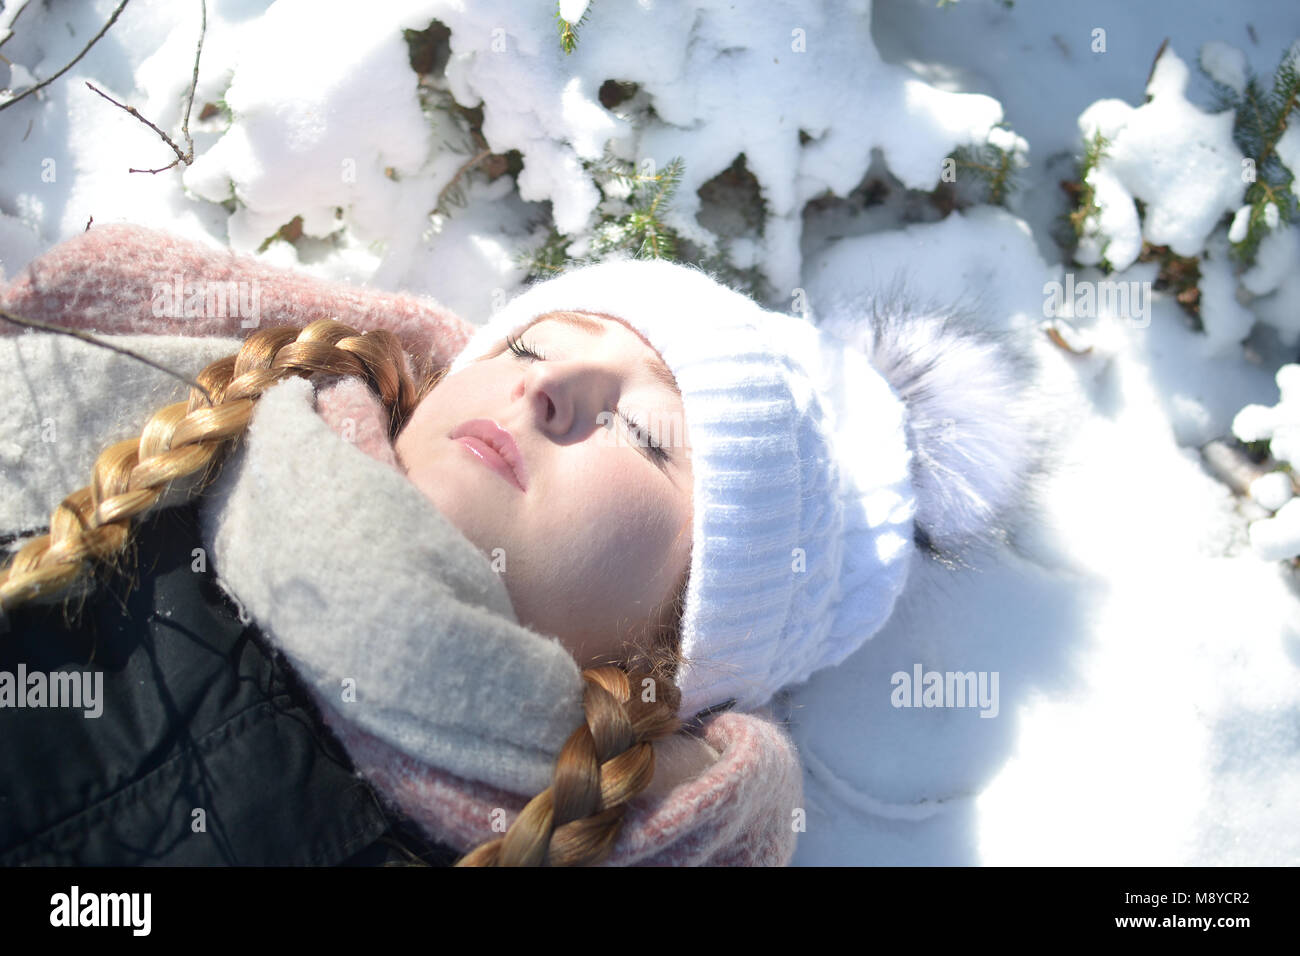 A young woman with warm clothes and closed eyes is lying in snow. A daydream scene. Stock Photo